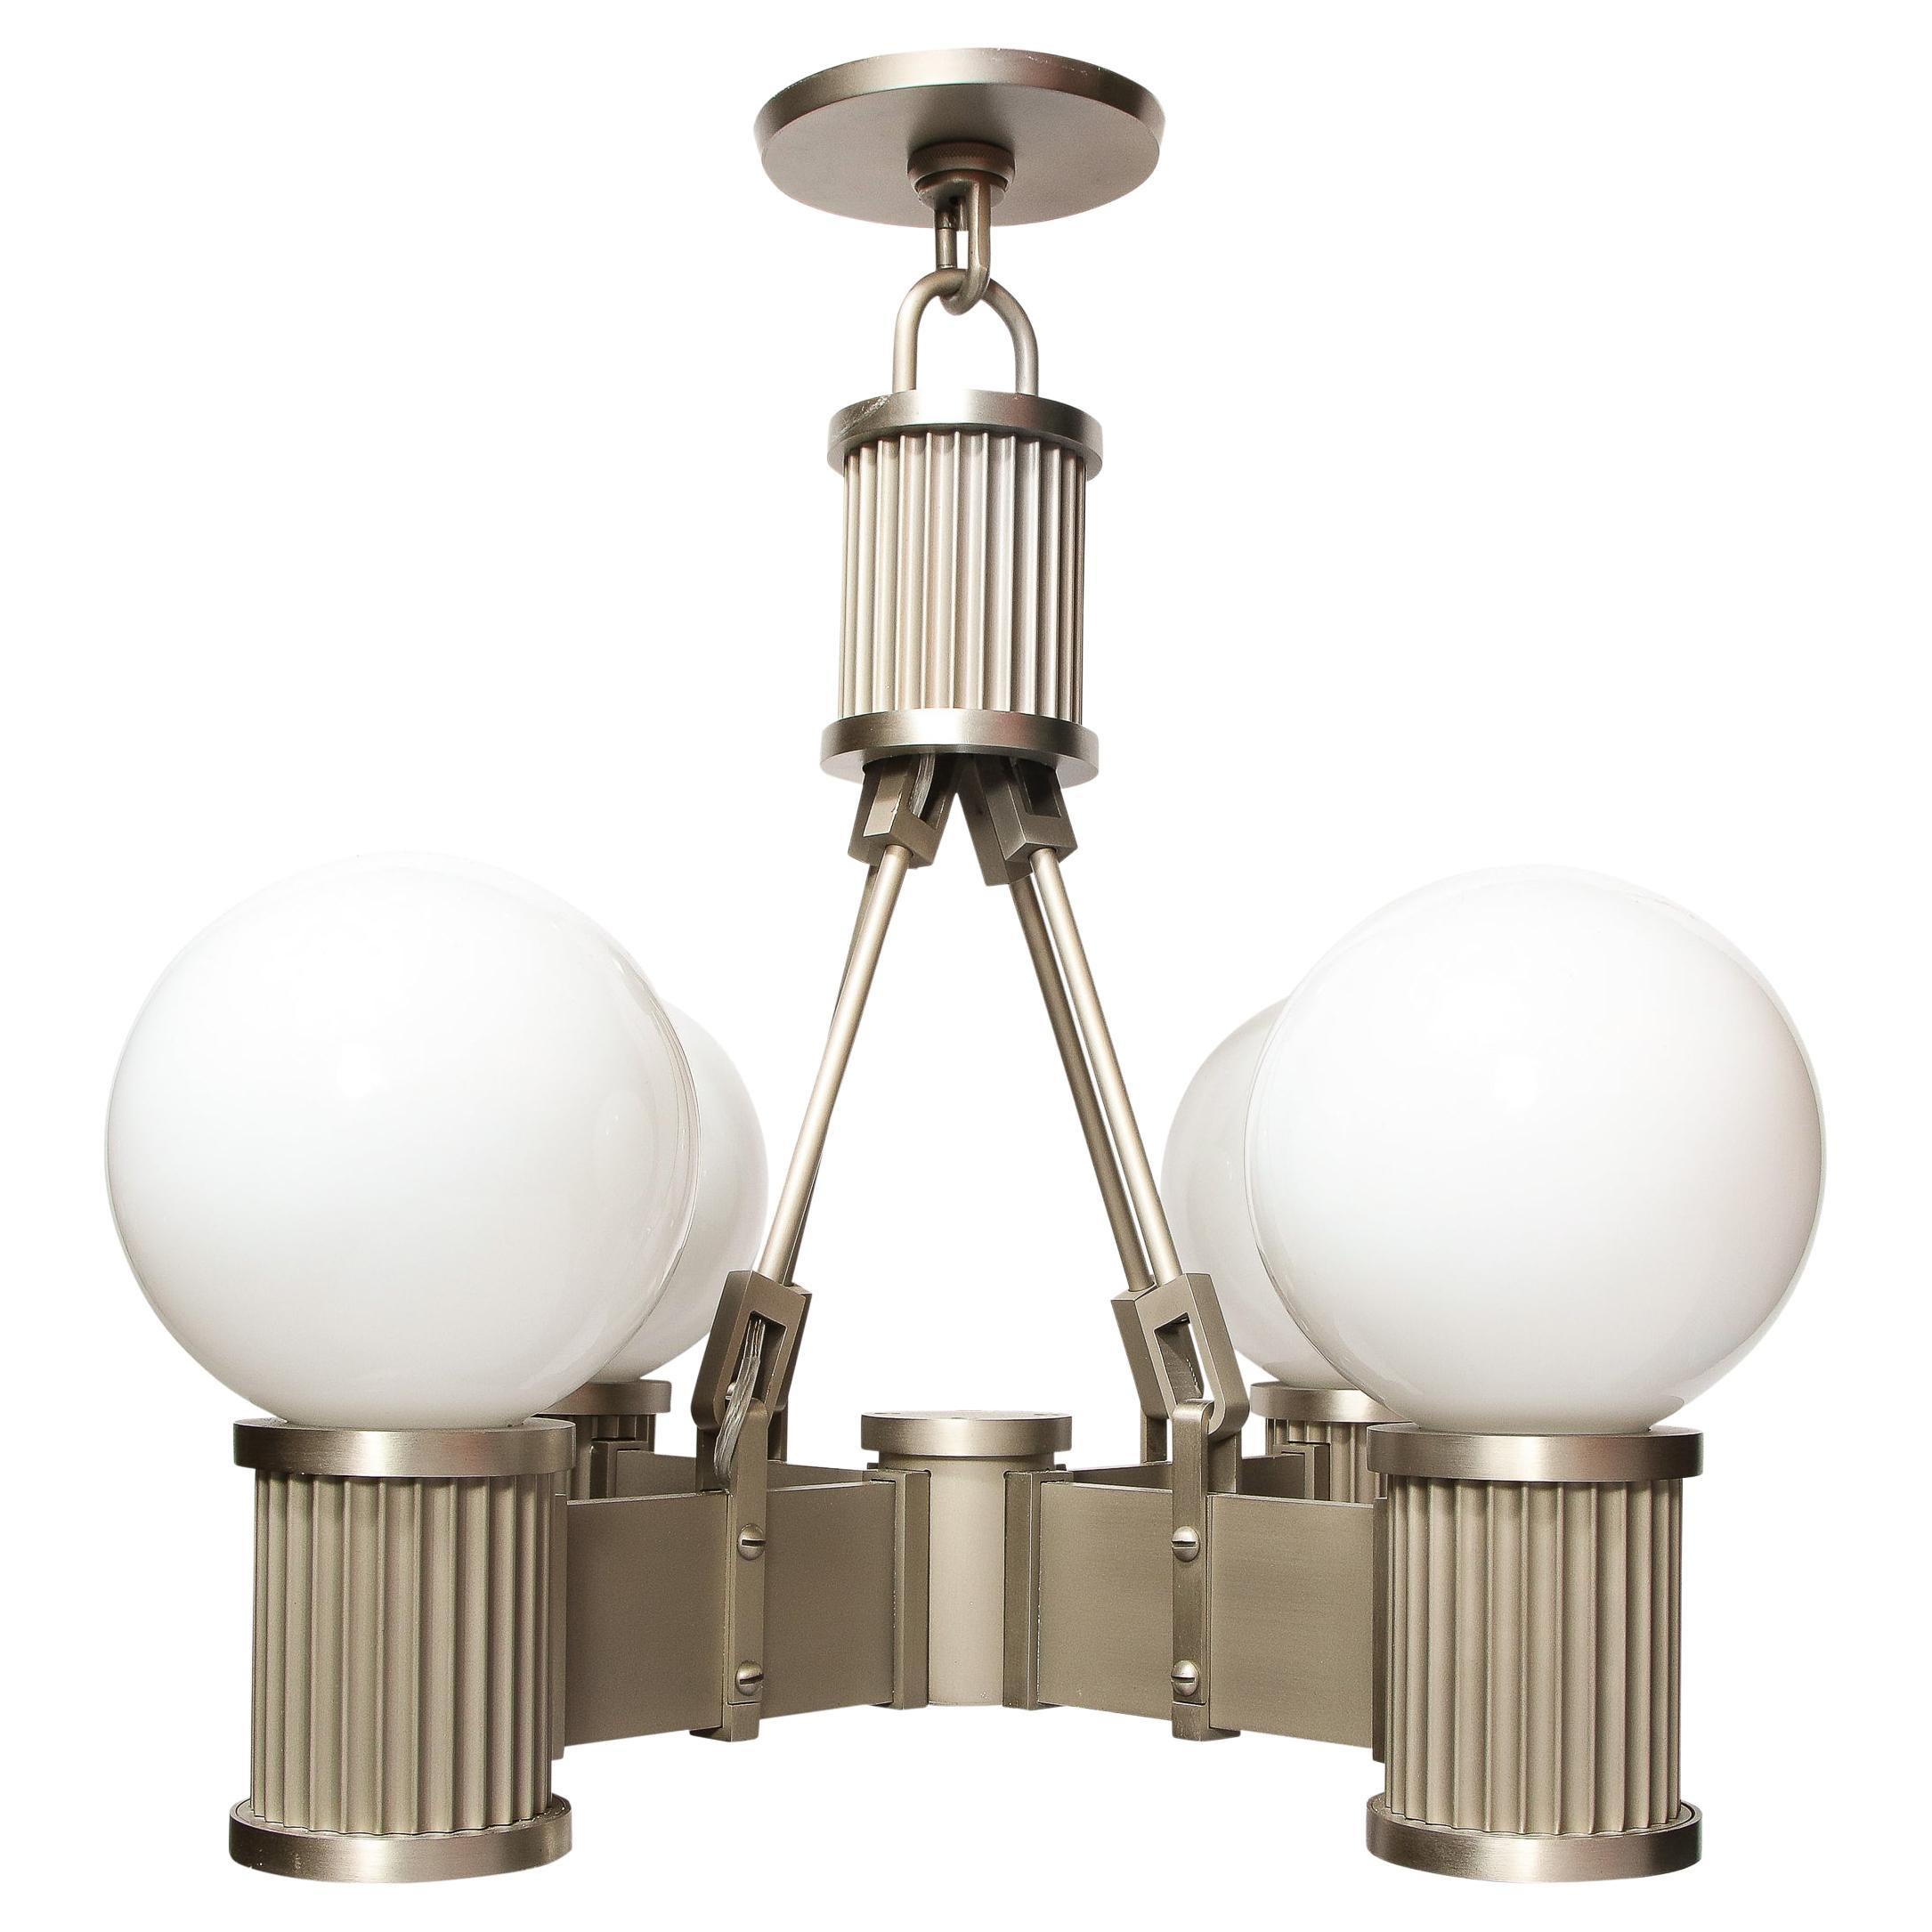 Art Deco Revival Four Arm Brushed Nickel & Frosted Glass Chandelier For Sale